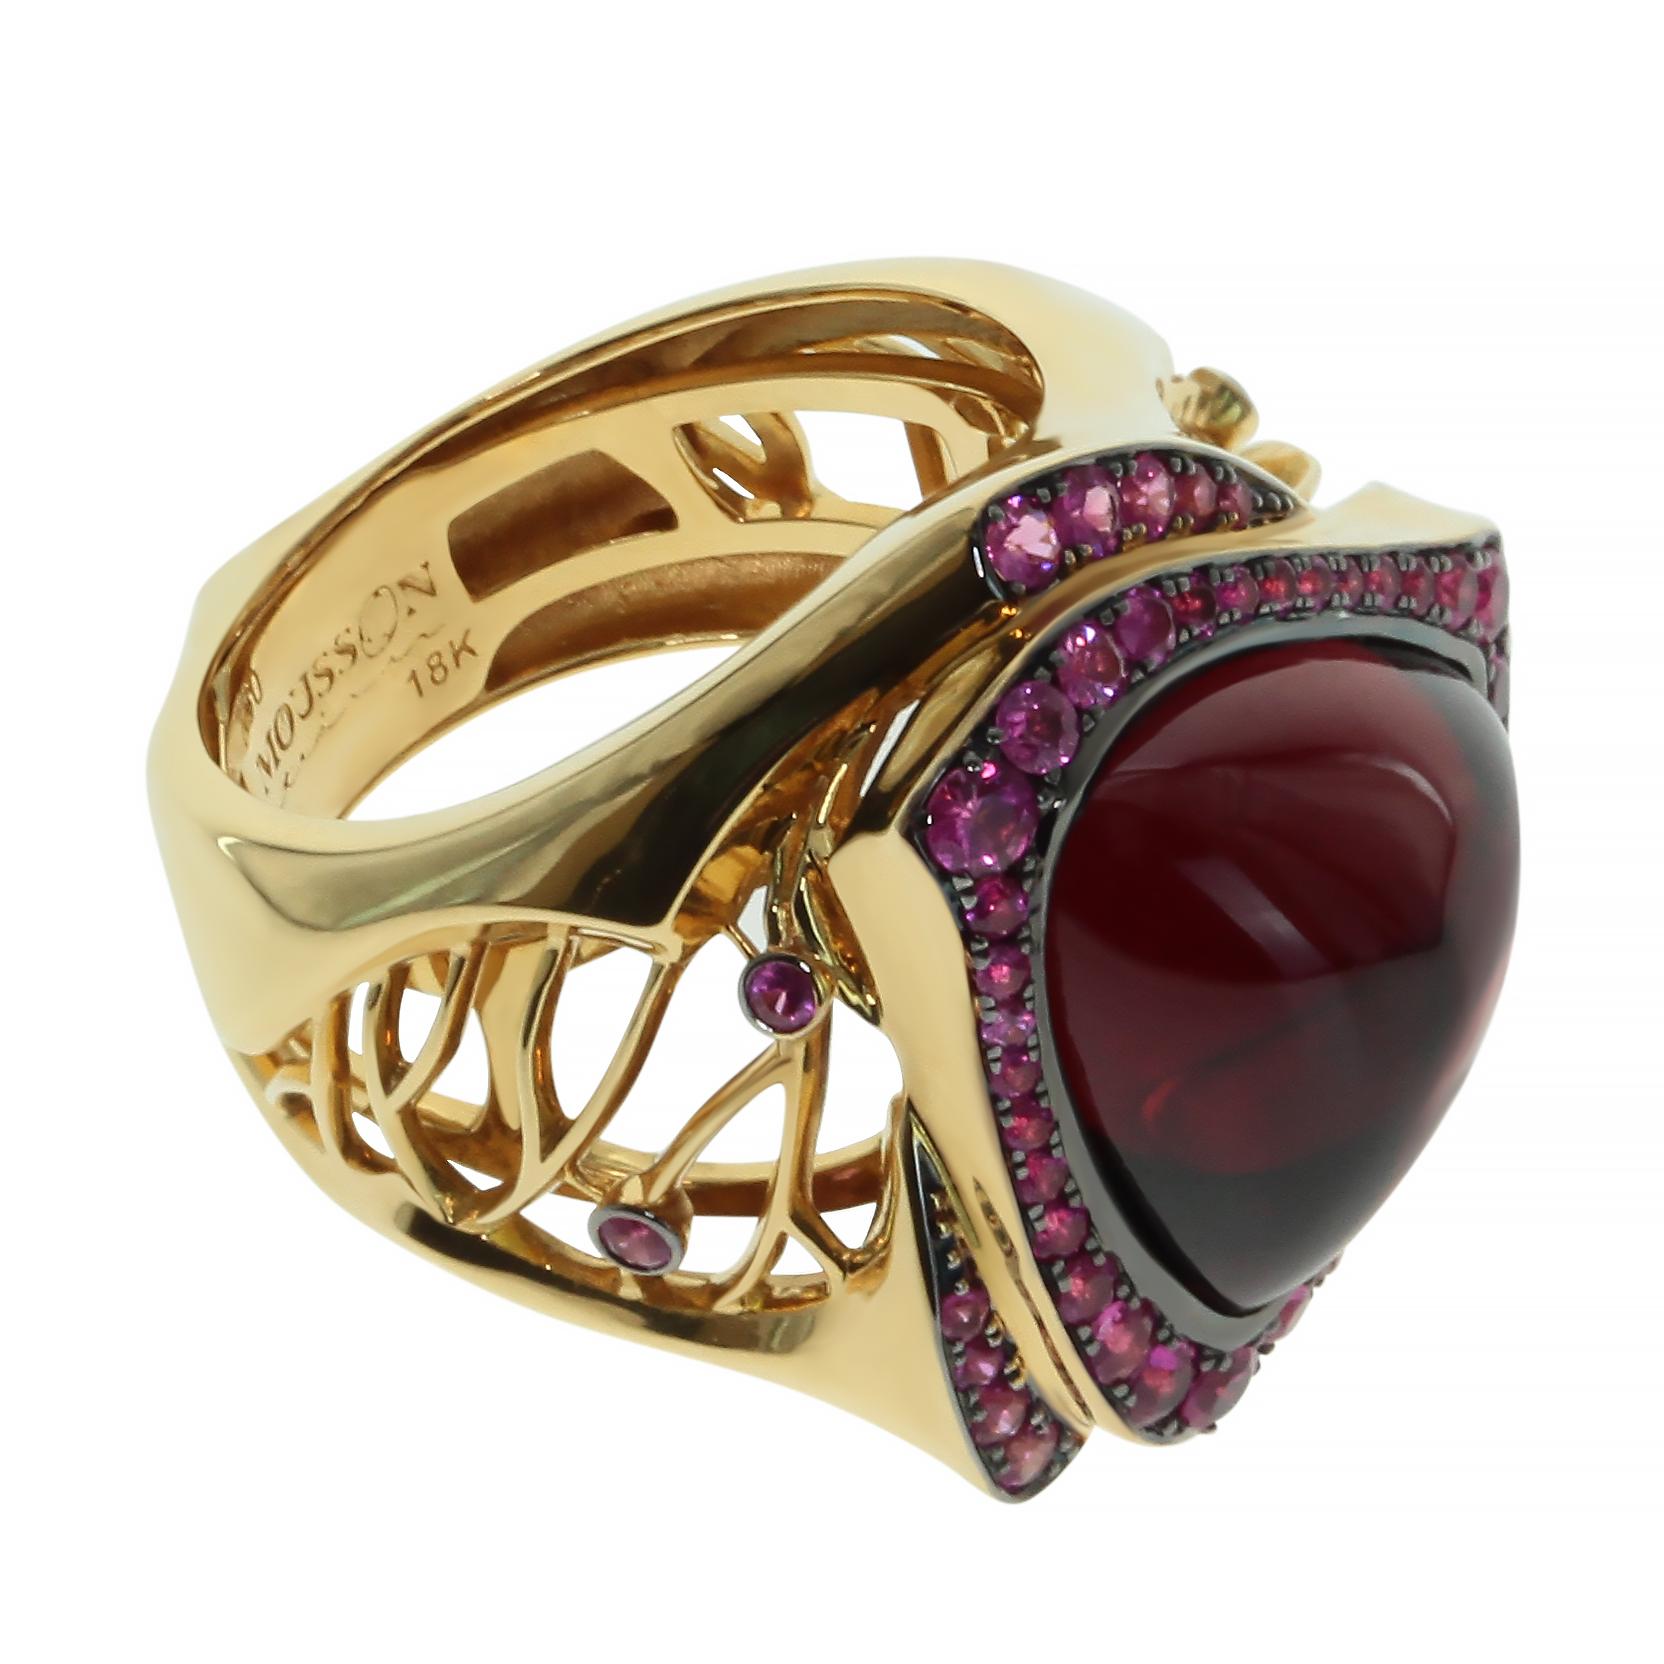 Garnet Trillion Cabochon Pink Sapphire 18 Karat Yellow Gold Ring.
Bright pink Sapphires elegantly complement rich deep color of Garnet. Through its shape and cut, this Trillion Cabochon Garnet 8.77 carat looks like the color of red pinot noir in a